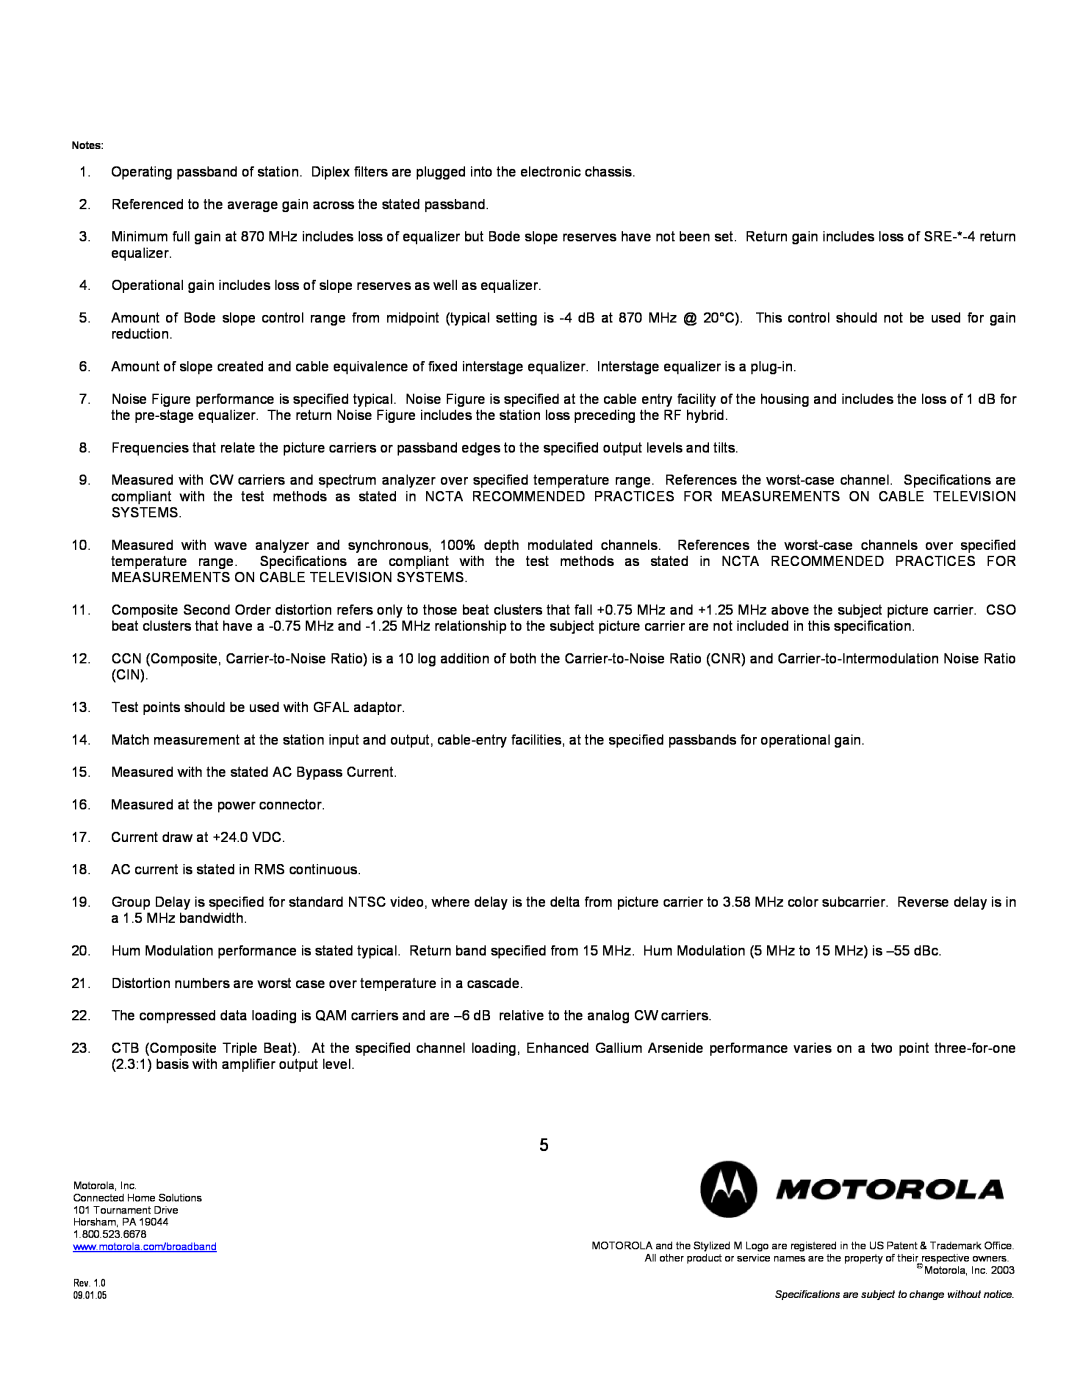 Motorola BLE87 specifications Referenced to the average gain across the stated passband 